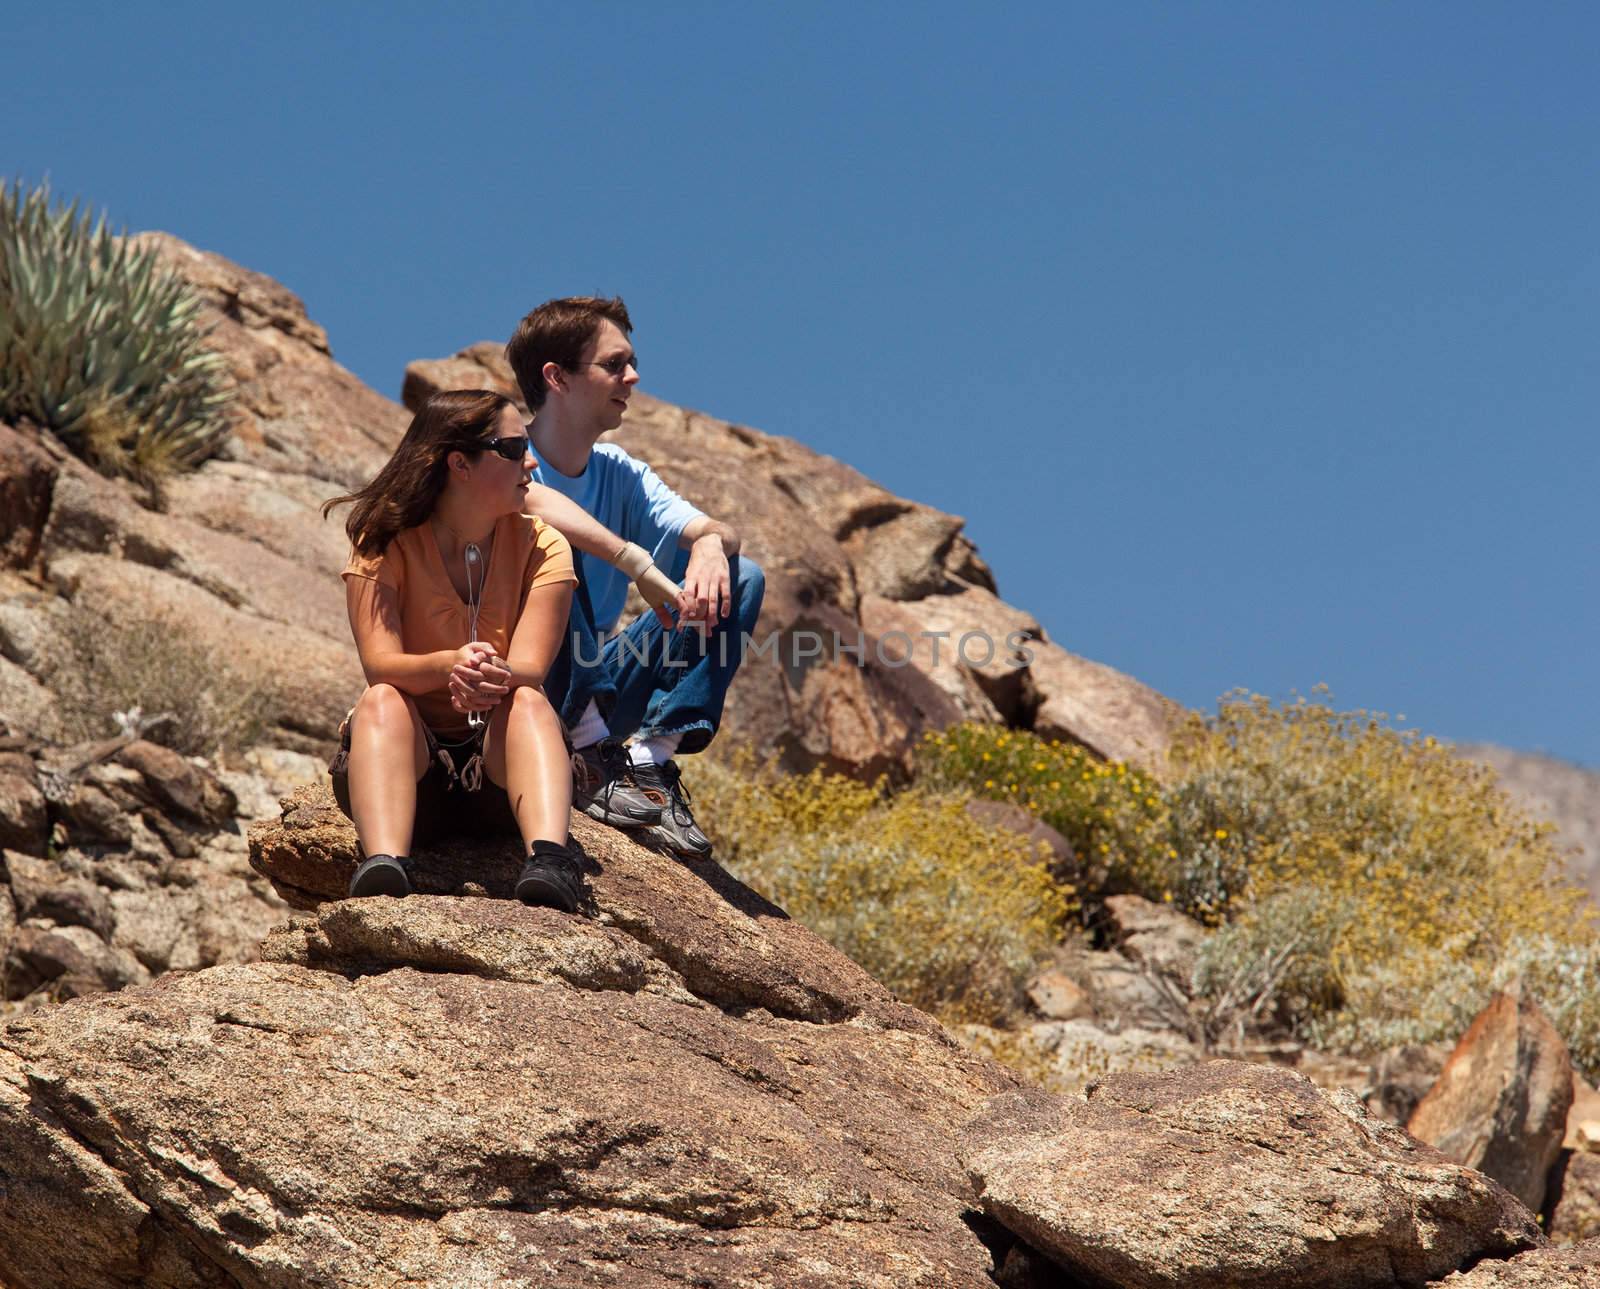 Hikers in desert look at distant object by steheap